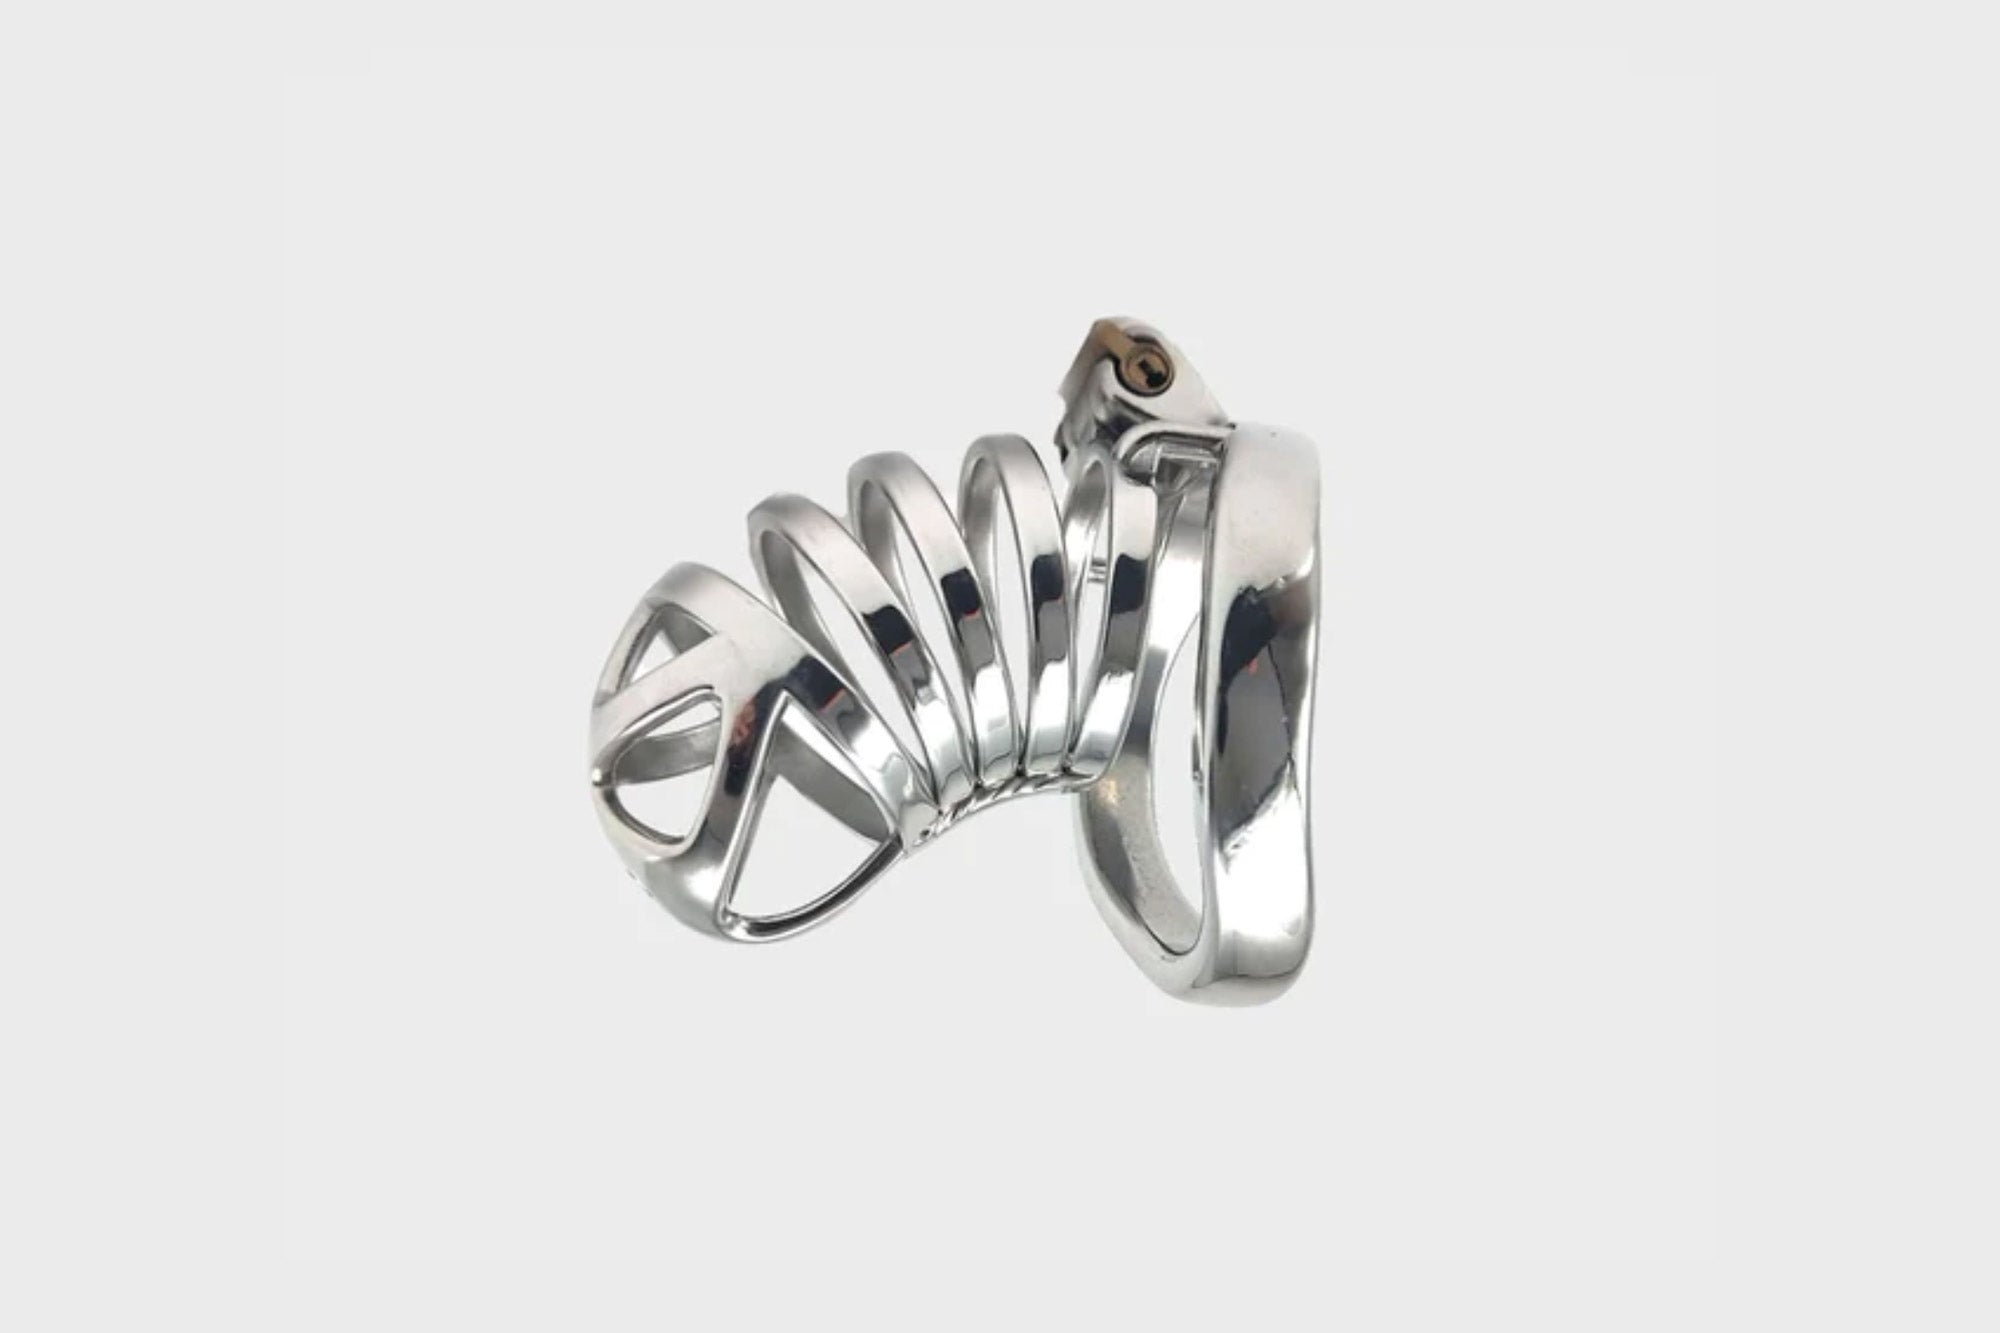 High quality mens steel chastity cage